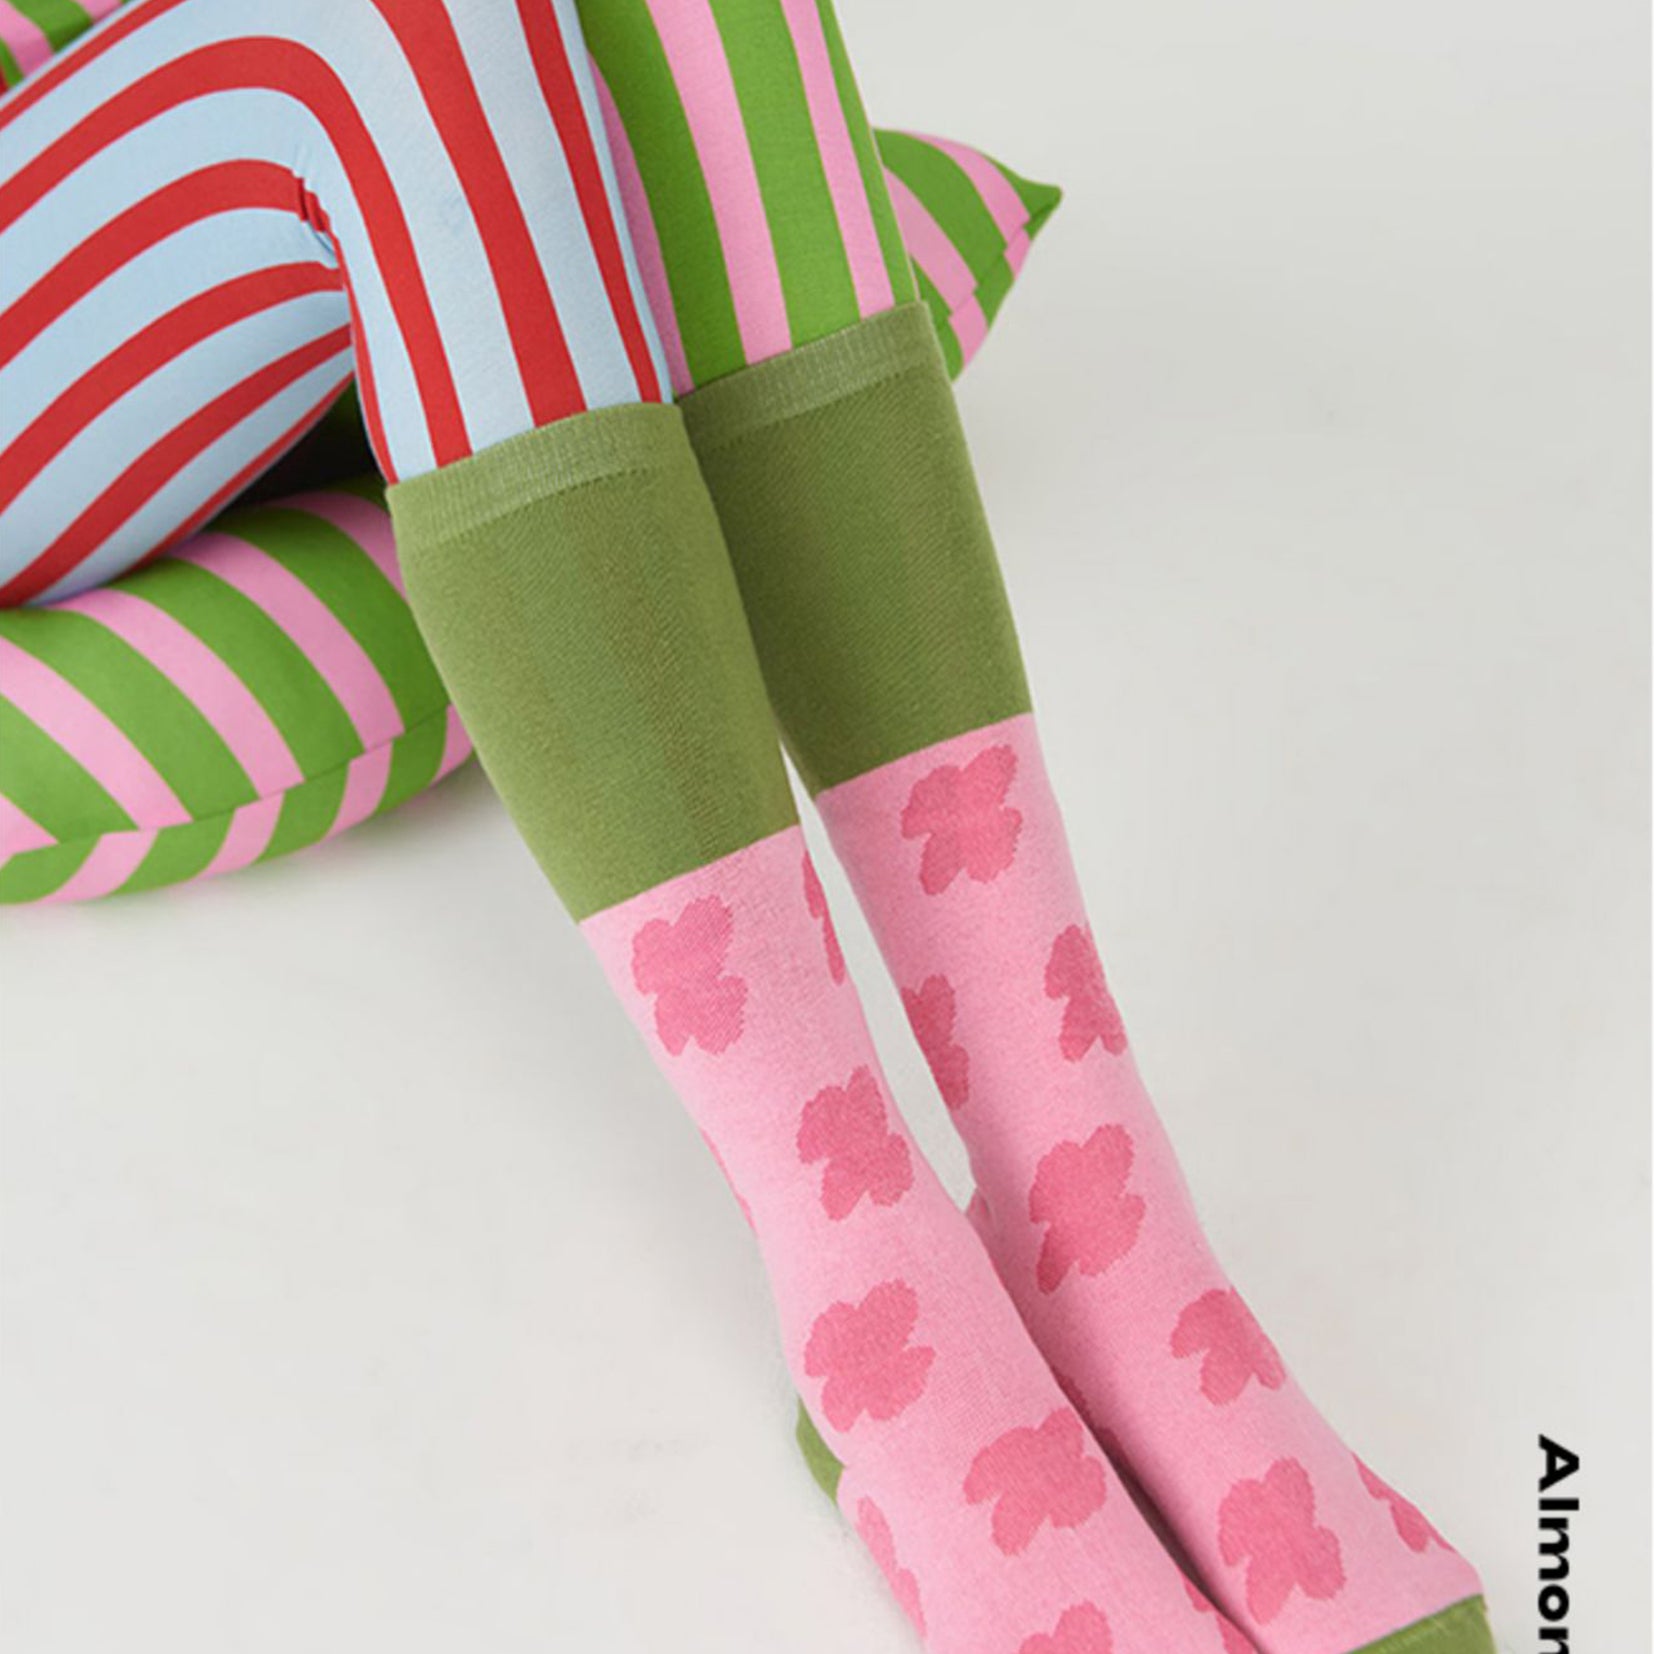 [For adults & kids] Floral splice over-the-calf sock in cherry blossom